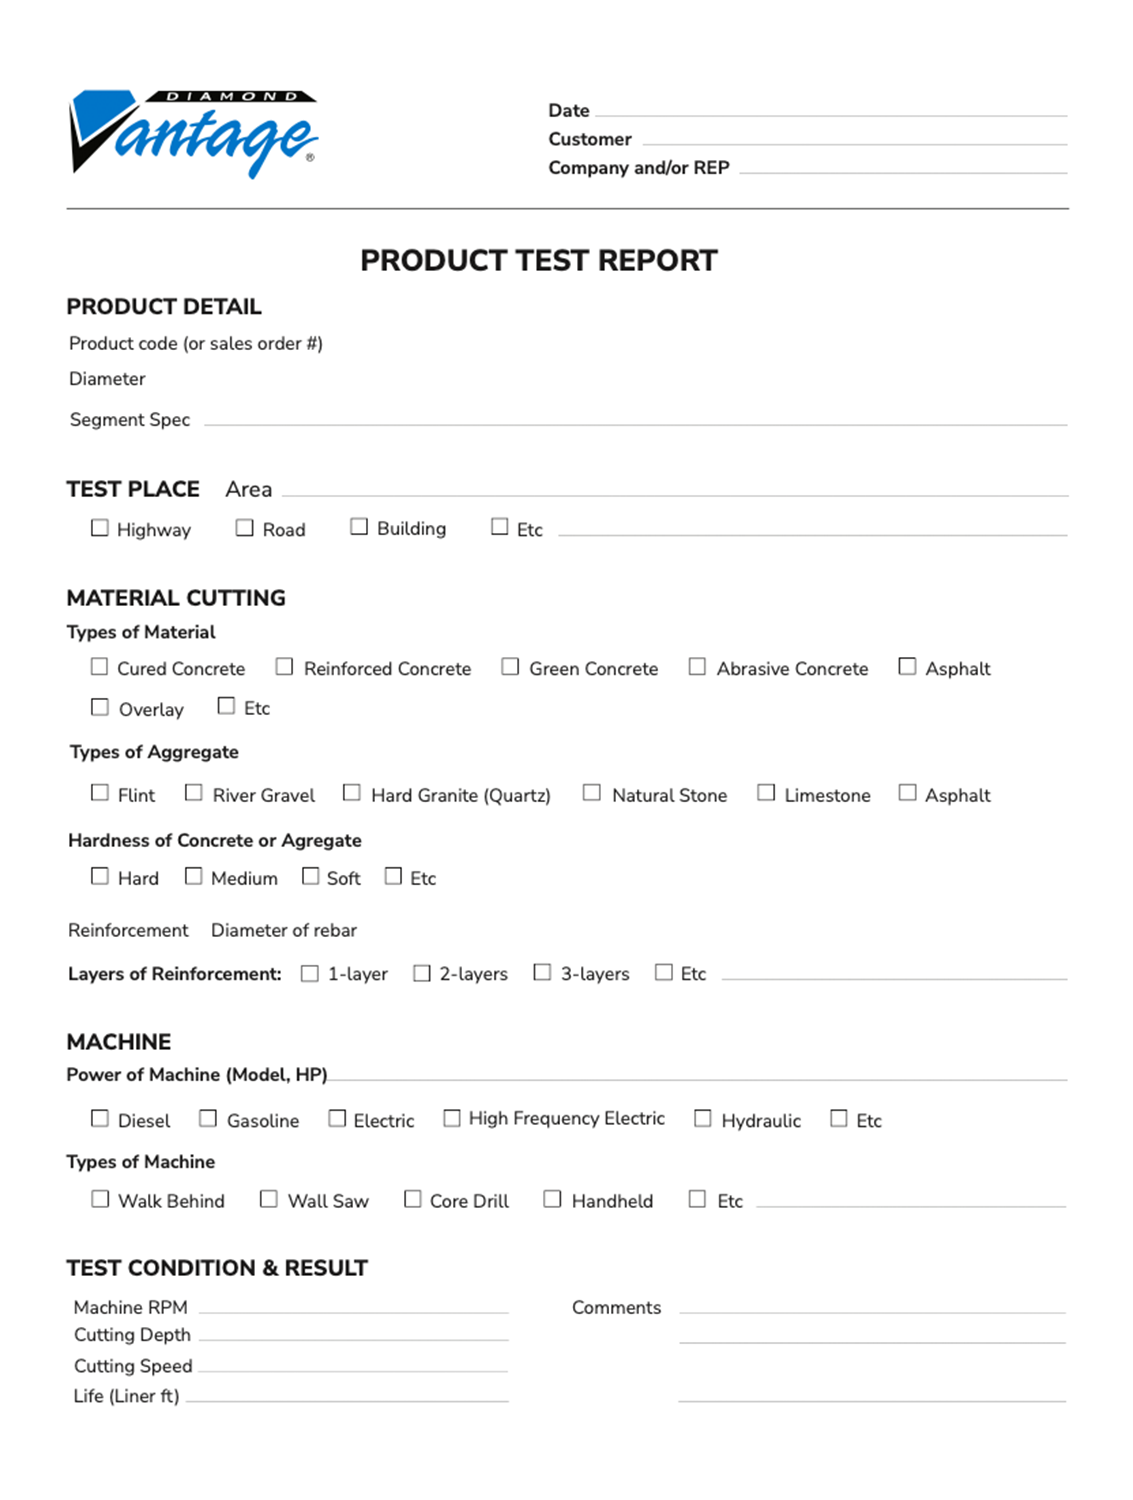 DV Product Test Report